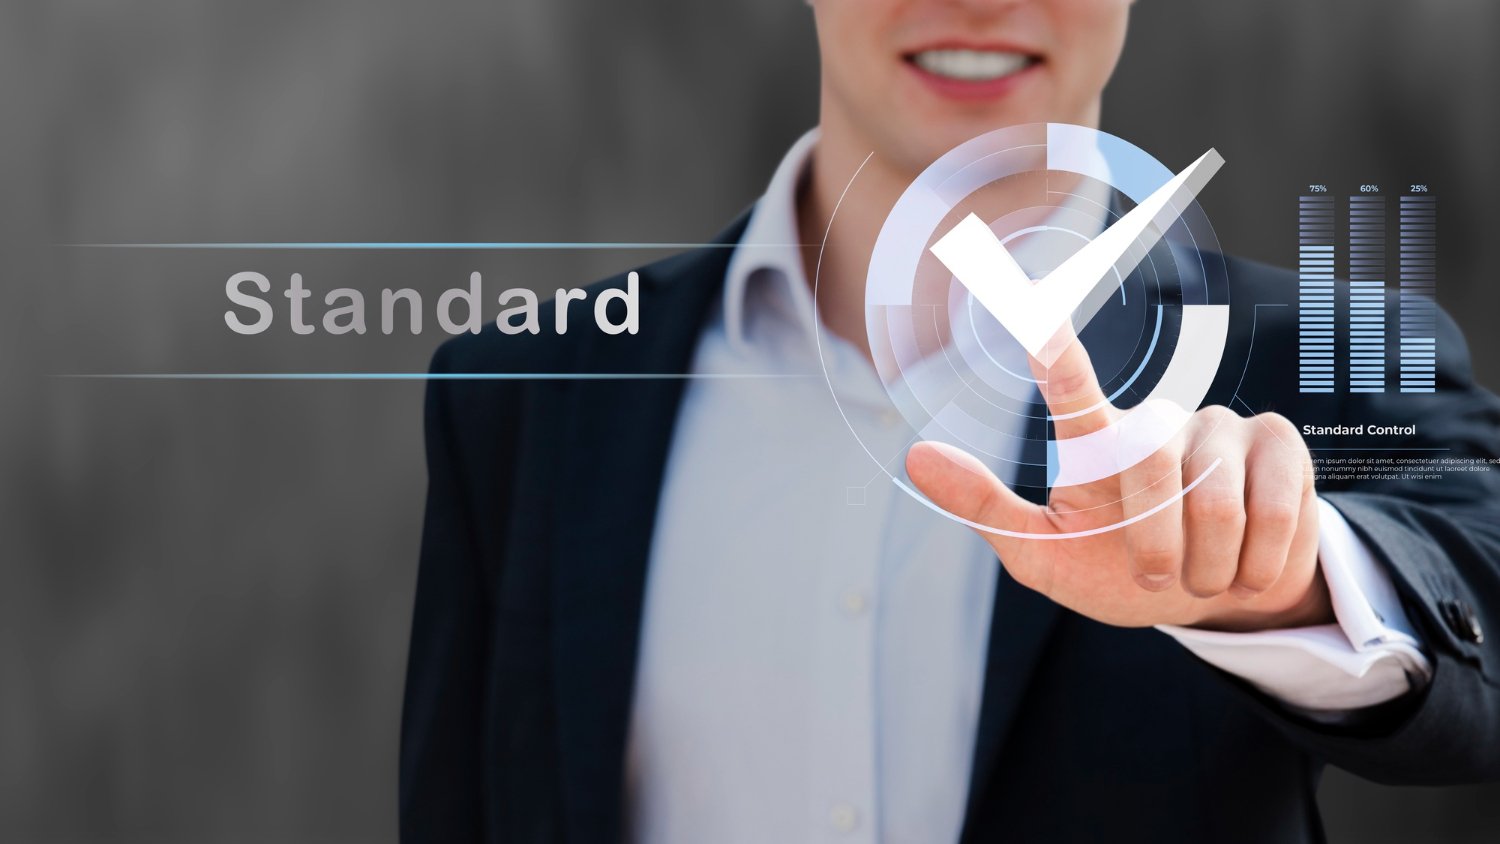 Common Mistakes to Avoid While Pursuing ISO Certification: Tips for Small Business Owners